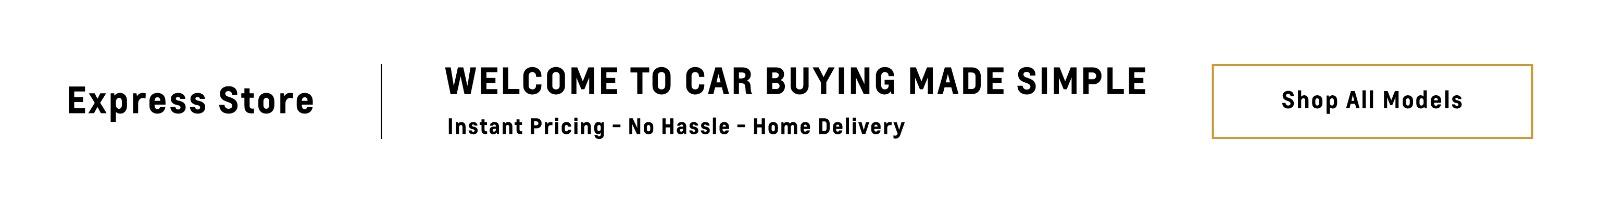 Express Store WELCOME TO CAR BUYING MADE SIMPLE Instant Pricing - No Hassle - Home Delivery Start Shopping